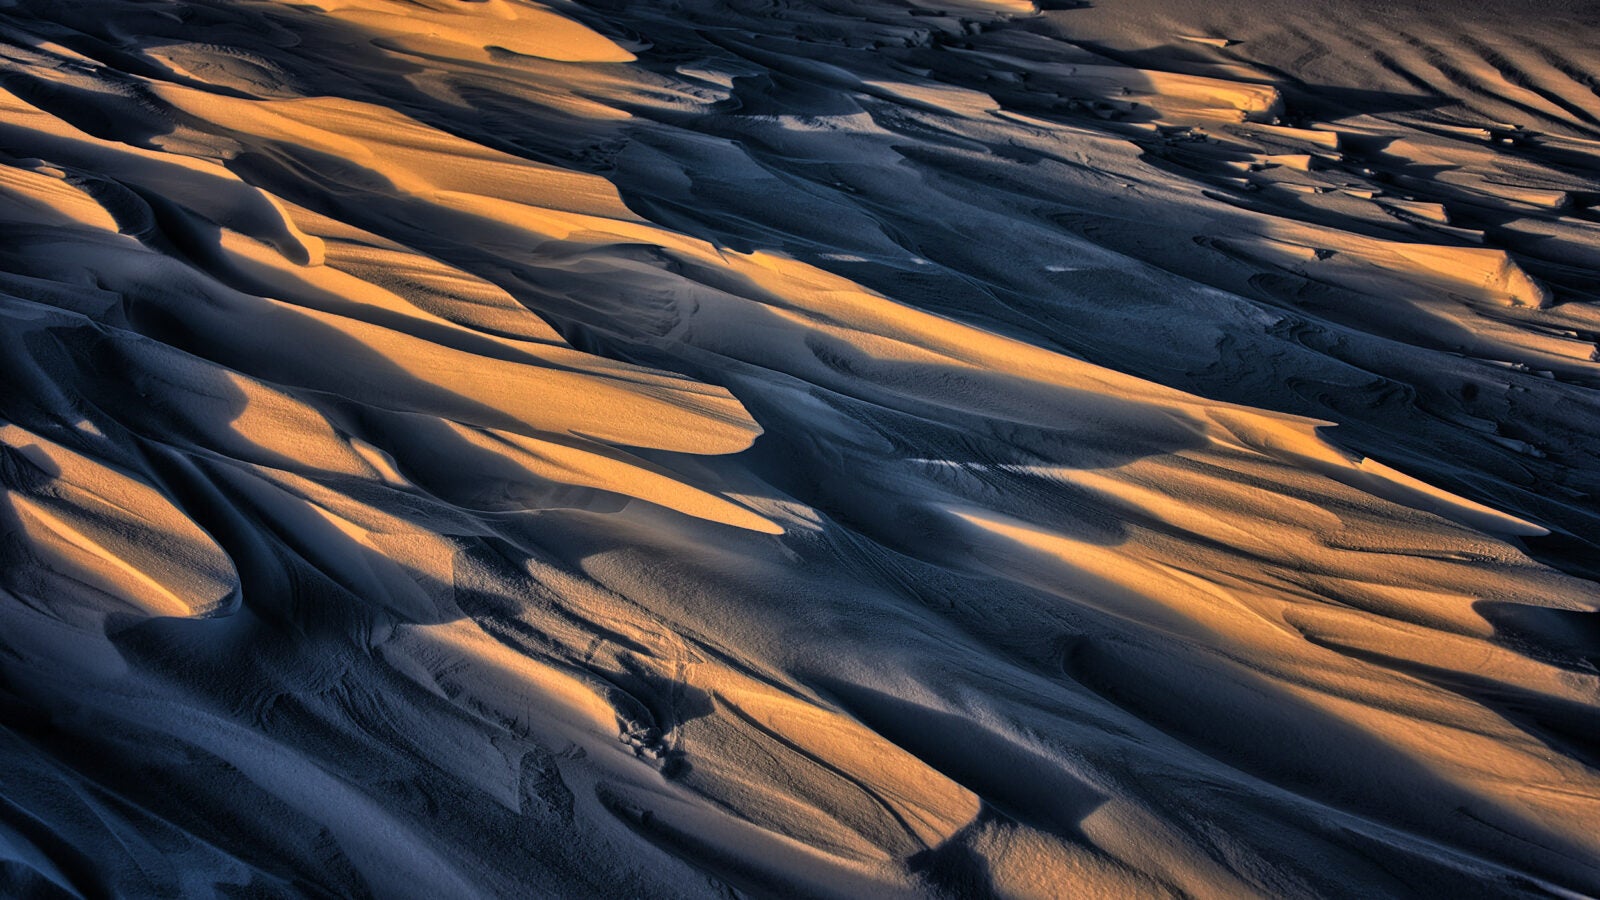 Dune-like formations sculpted by the wind called Sastrugi cast shadows on ice.